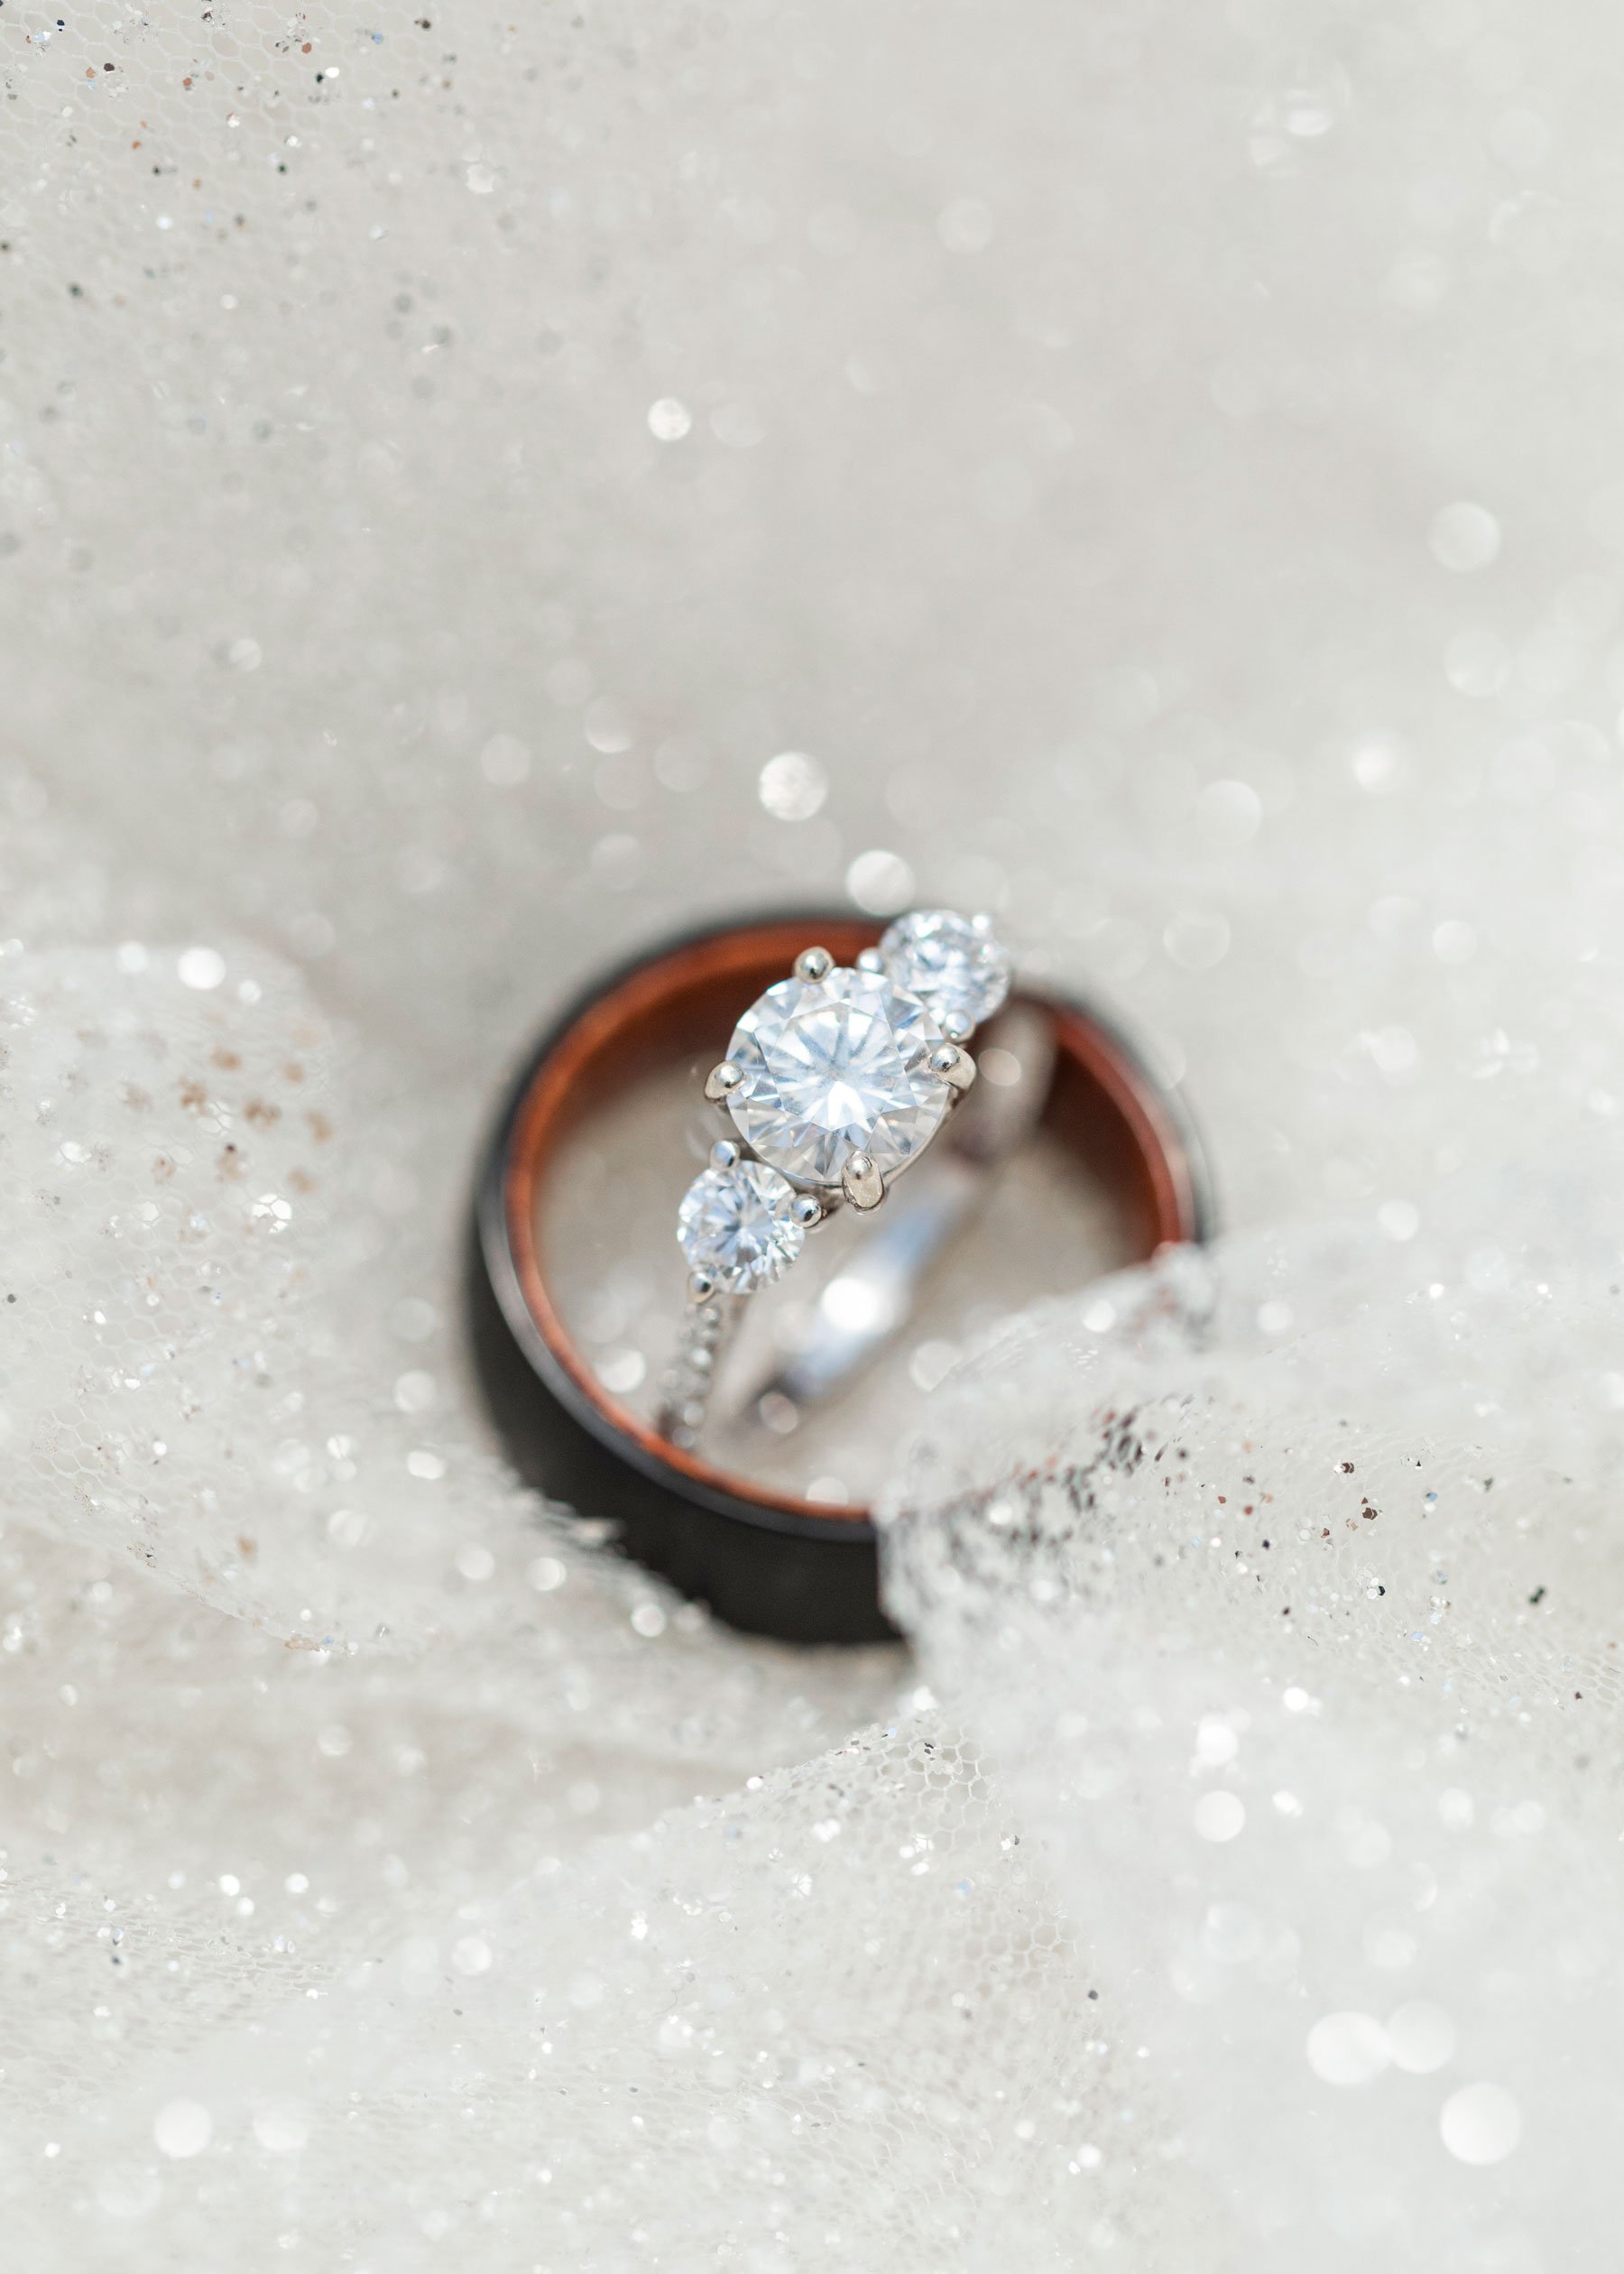  Black and wood groom ring with a three-round diamond wedding ring photo laying on the sparkly bridal gown by Savanna Richardson Photography during a Utah County Wedding. ring shot wedding ring silver wedding ring #savannarichardsonphotography #Savan